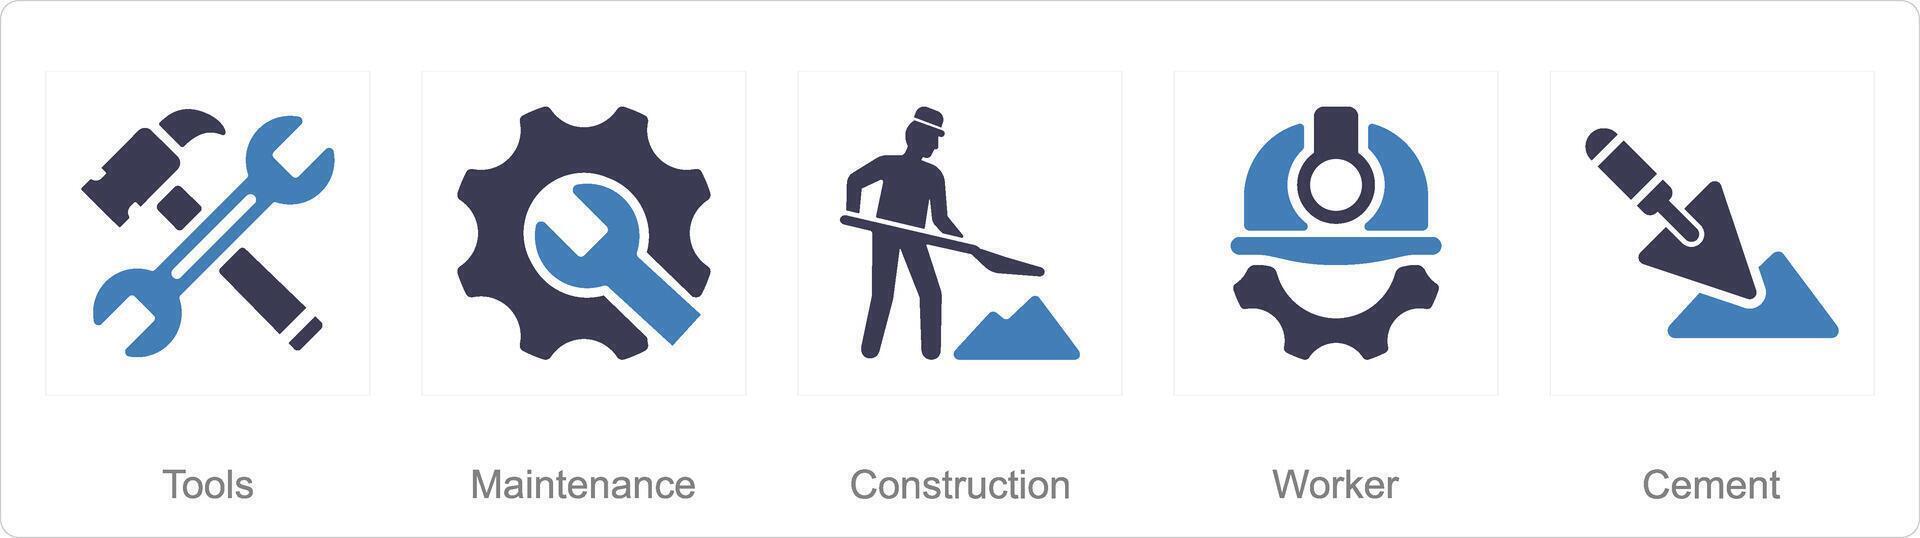 A set of 5 Build icons as tools, maintenance, construction vector